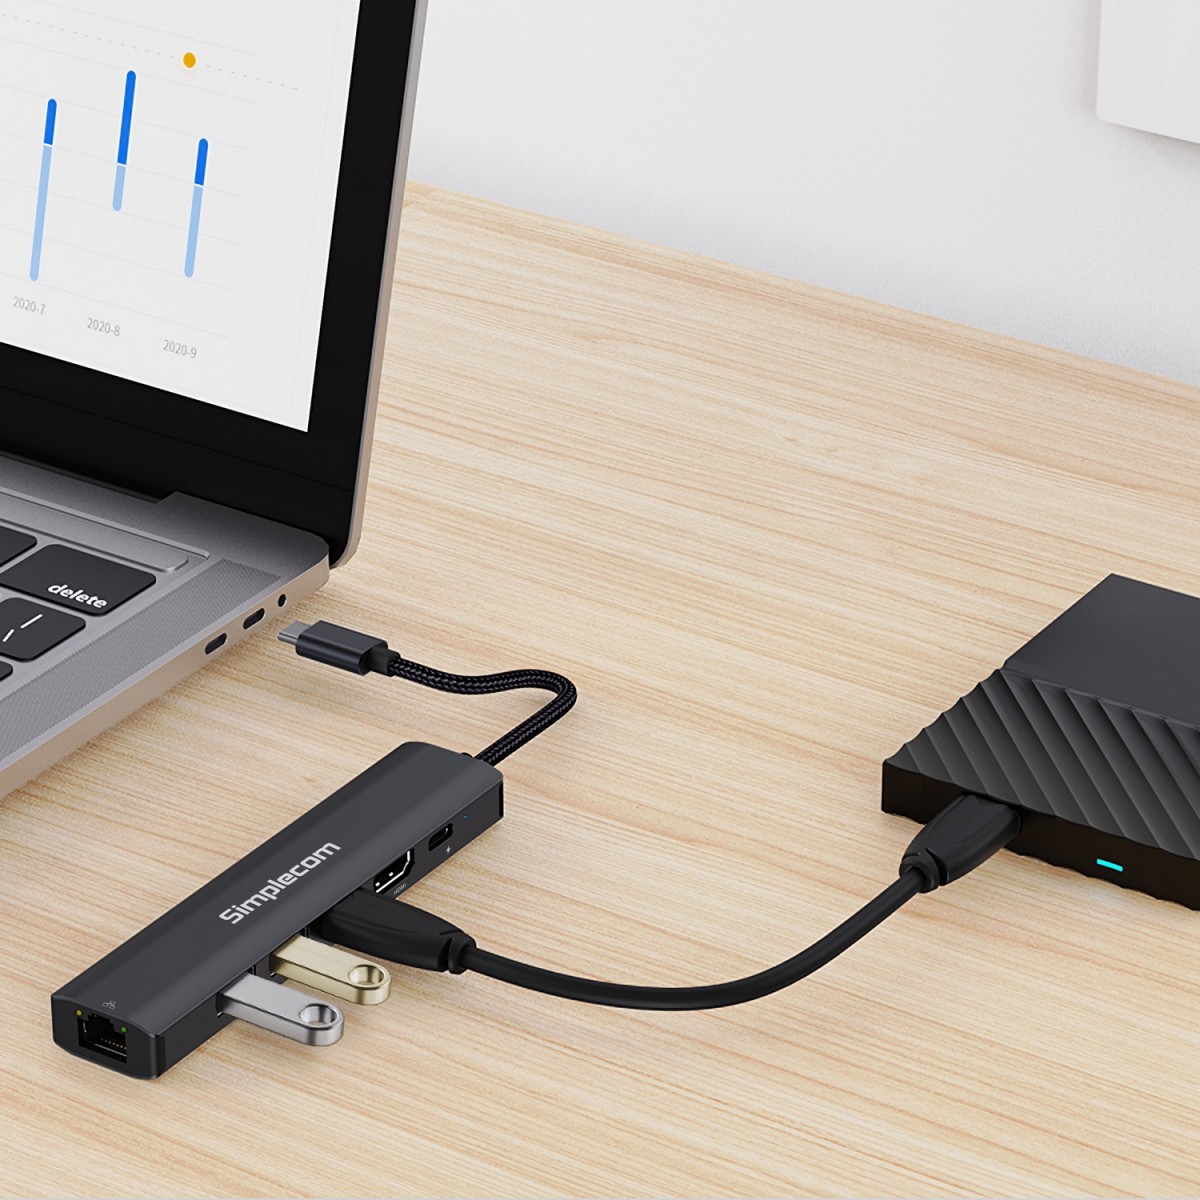 A large marketing image providing additional information about the product Simplecom USB-C SuperSpeed 6-in-1 Multiport Adapter Docking Station - Additional alt info not provided